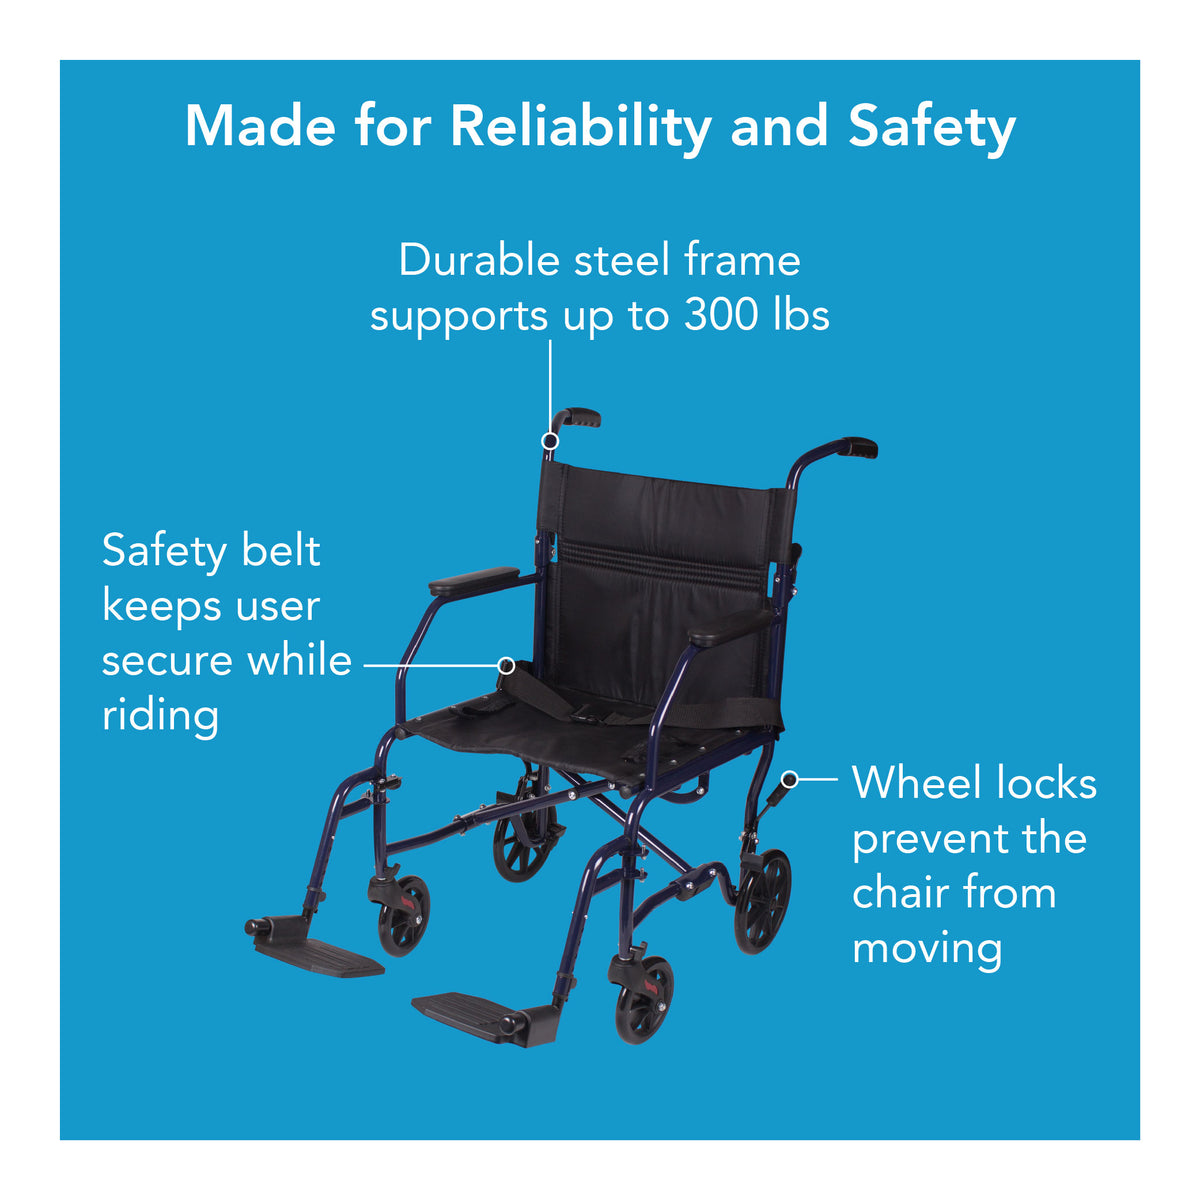 A blue transport chair over a blue background with text explaining its features for reliability and safety